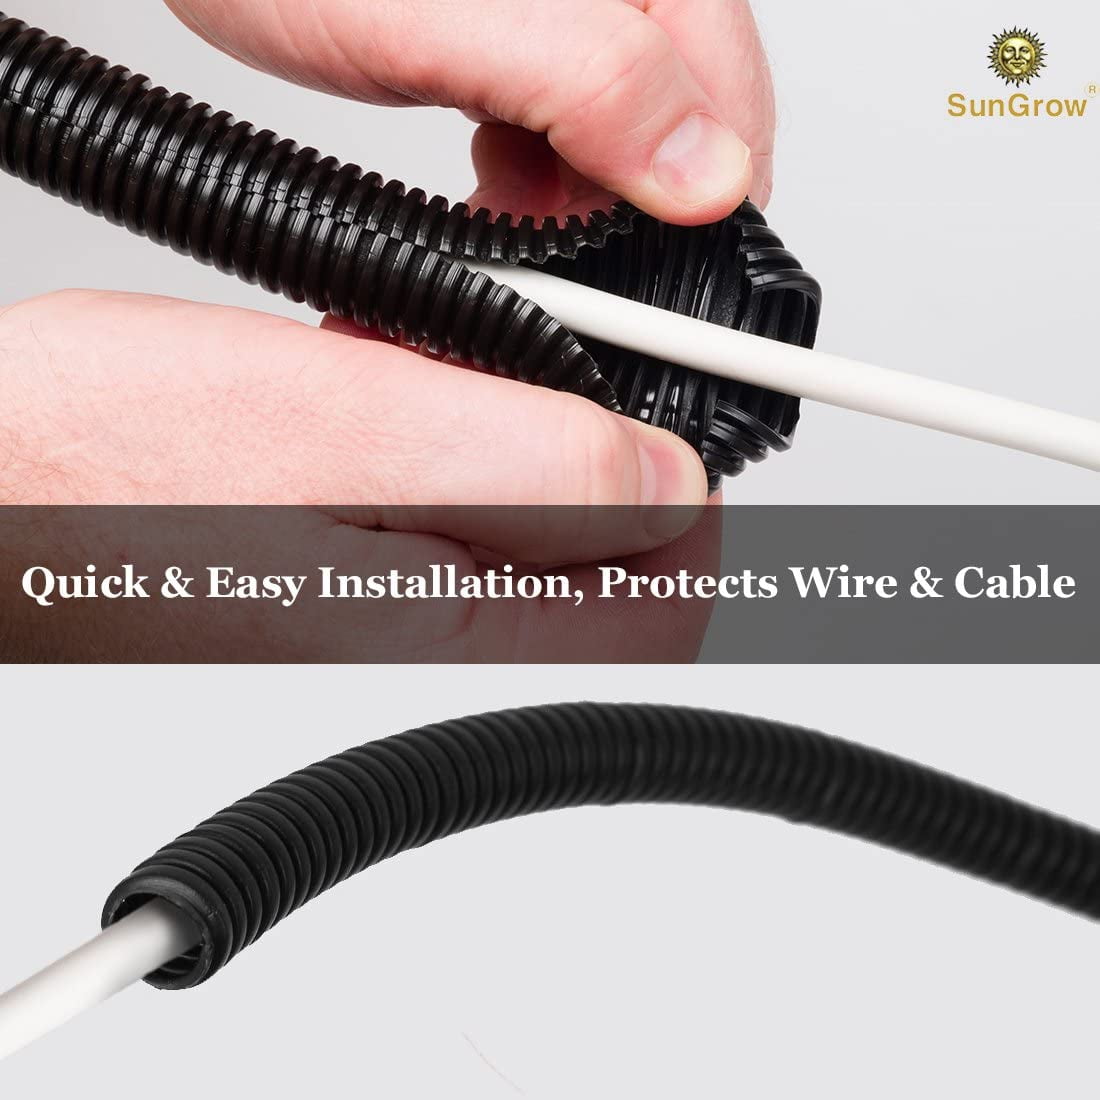 Top 5 Reasons Why It's Smart To Use A Wire Protector For Your Cables